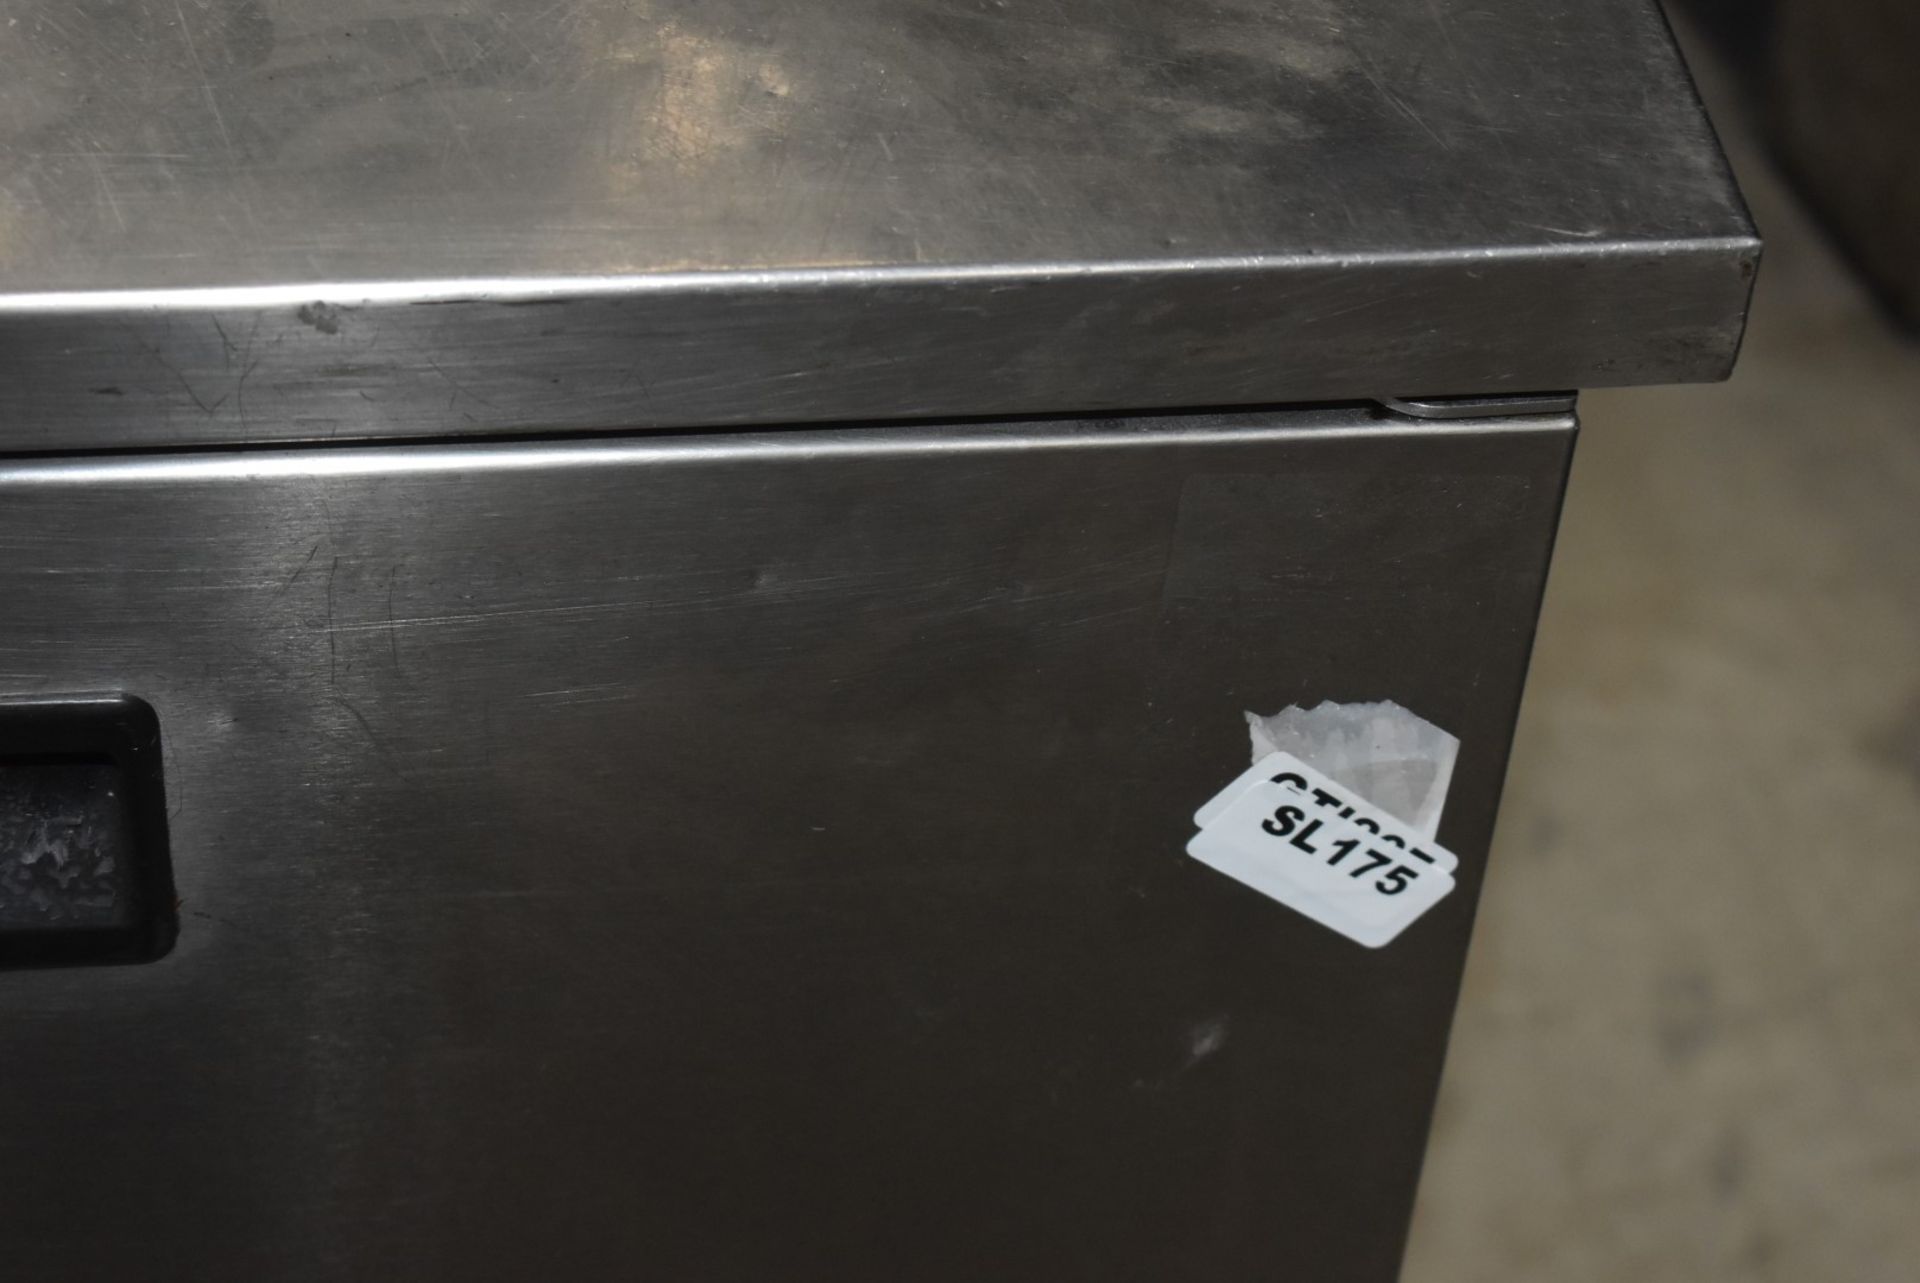 1 x Fosters Three Door Countertop Refrigerator With Stainless Steel Exterior - Dimensions: H81 x - Image 9 of 9